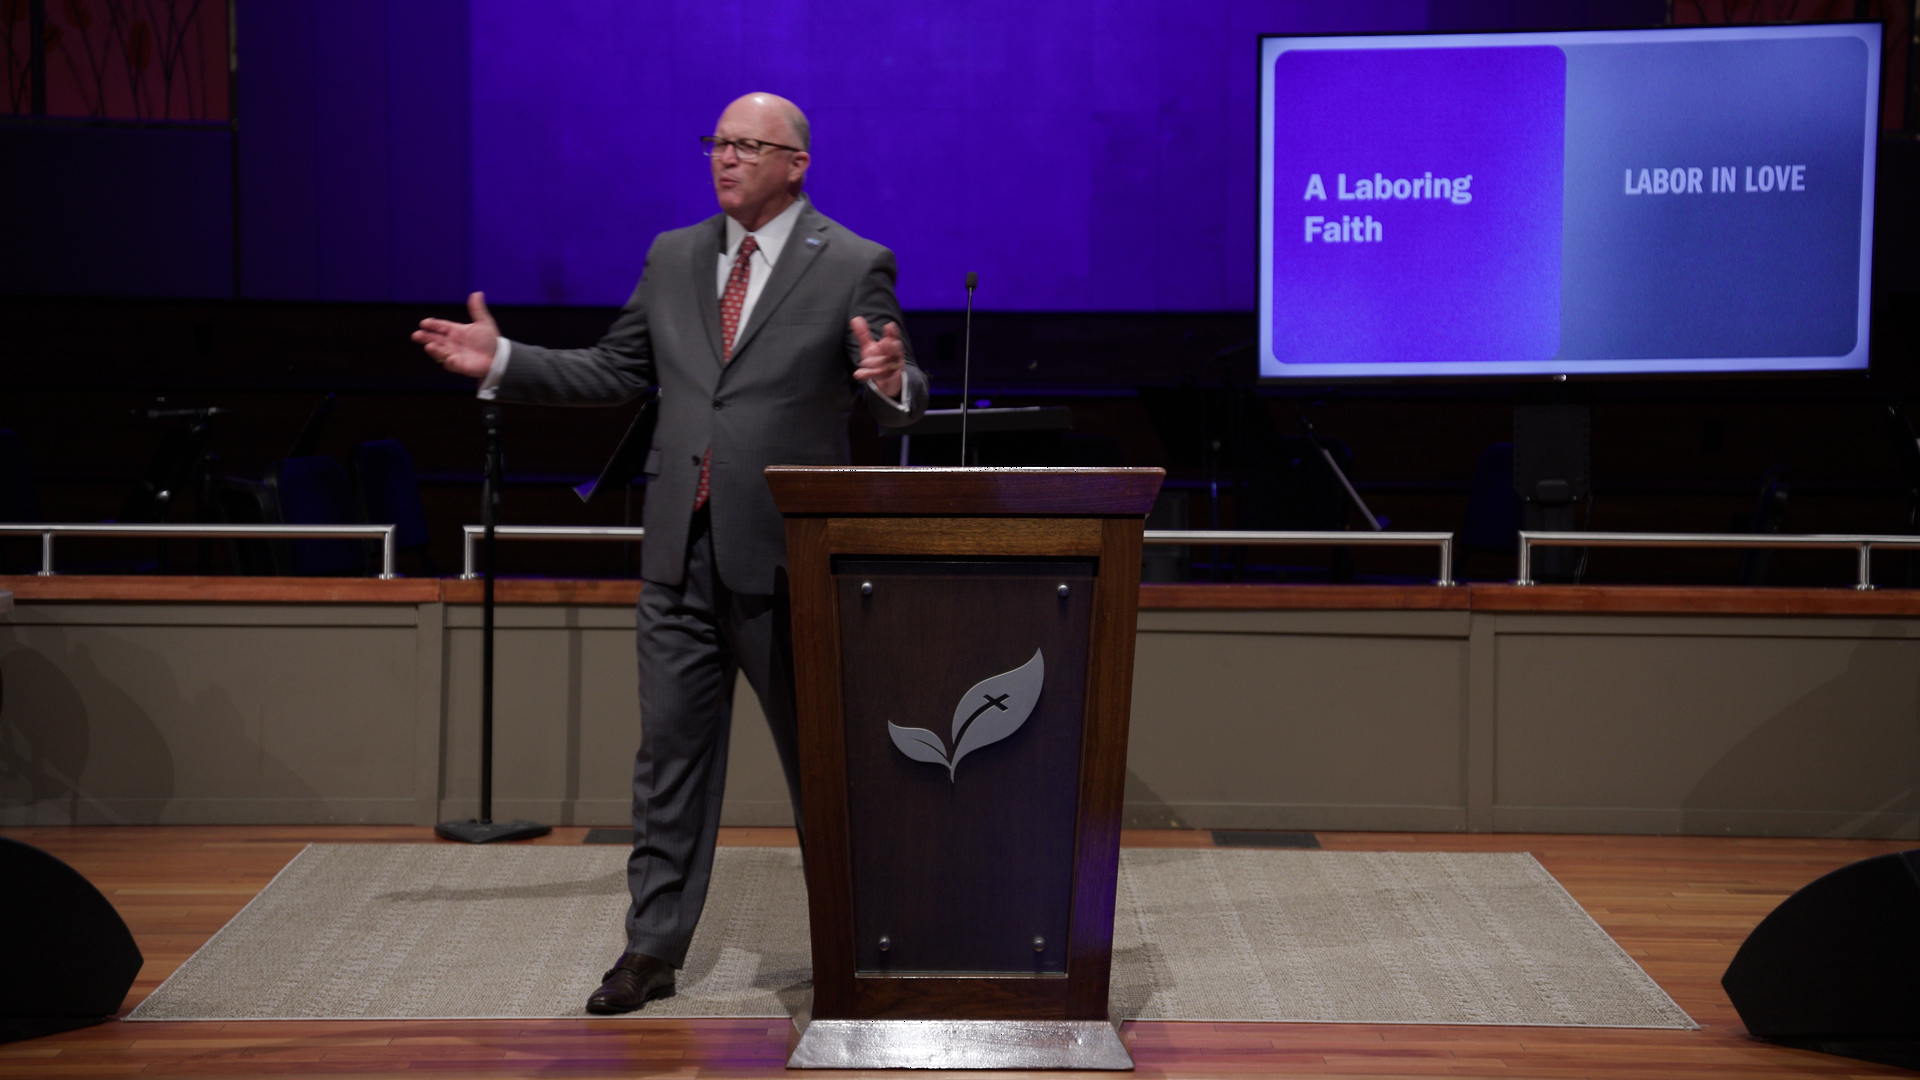 Pastor Paul Chappell: Living By Faith